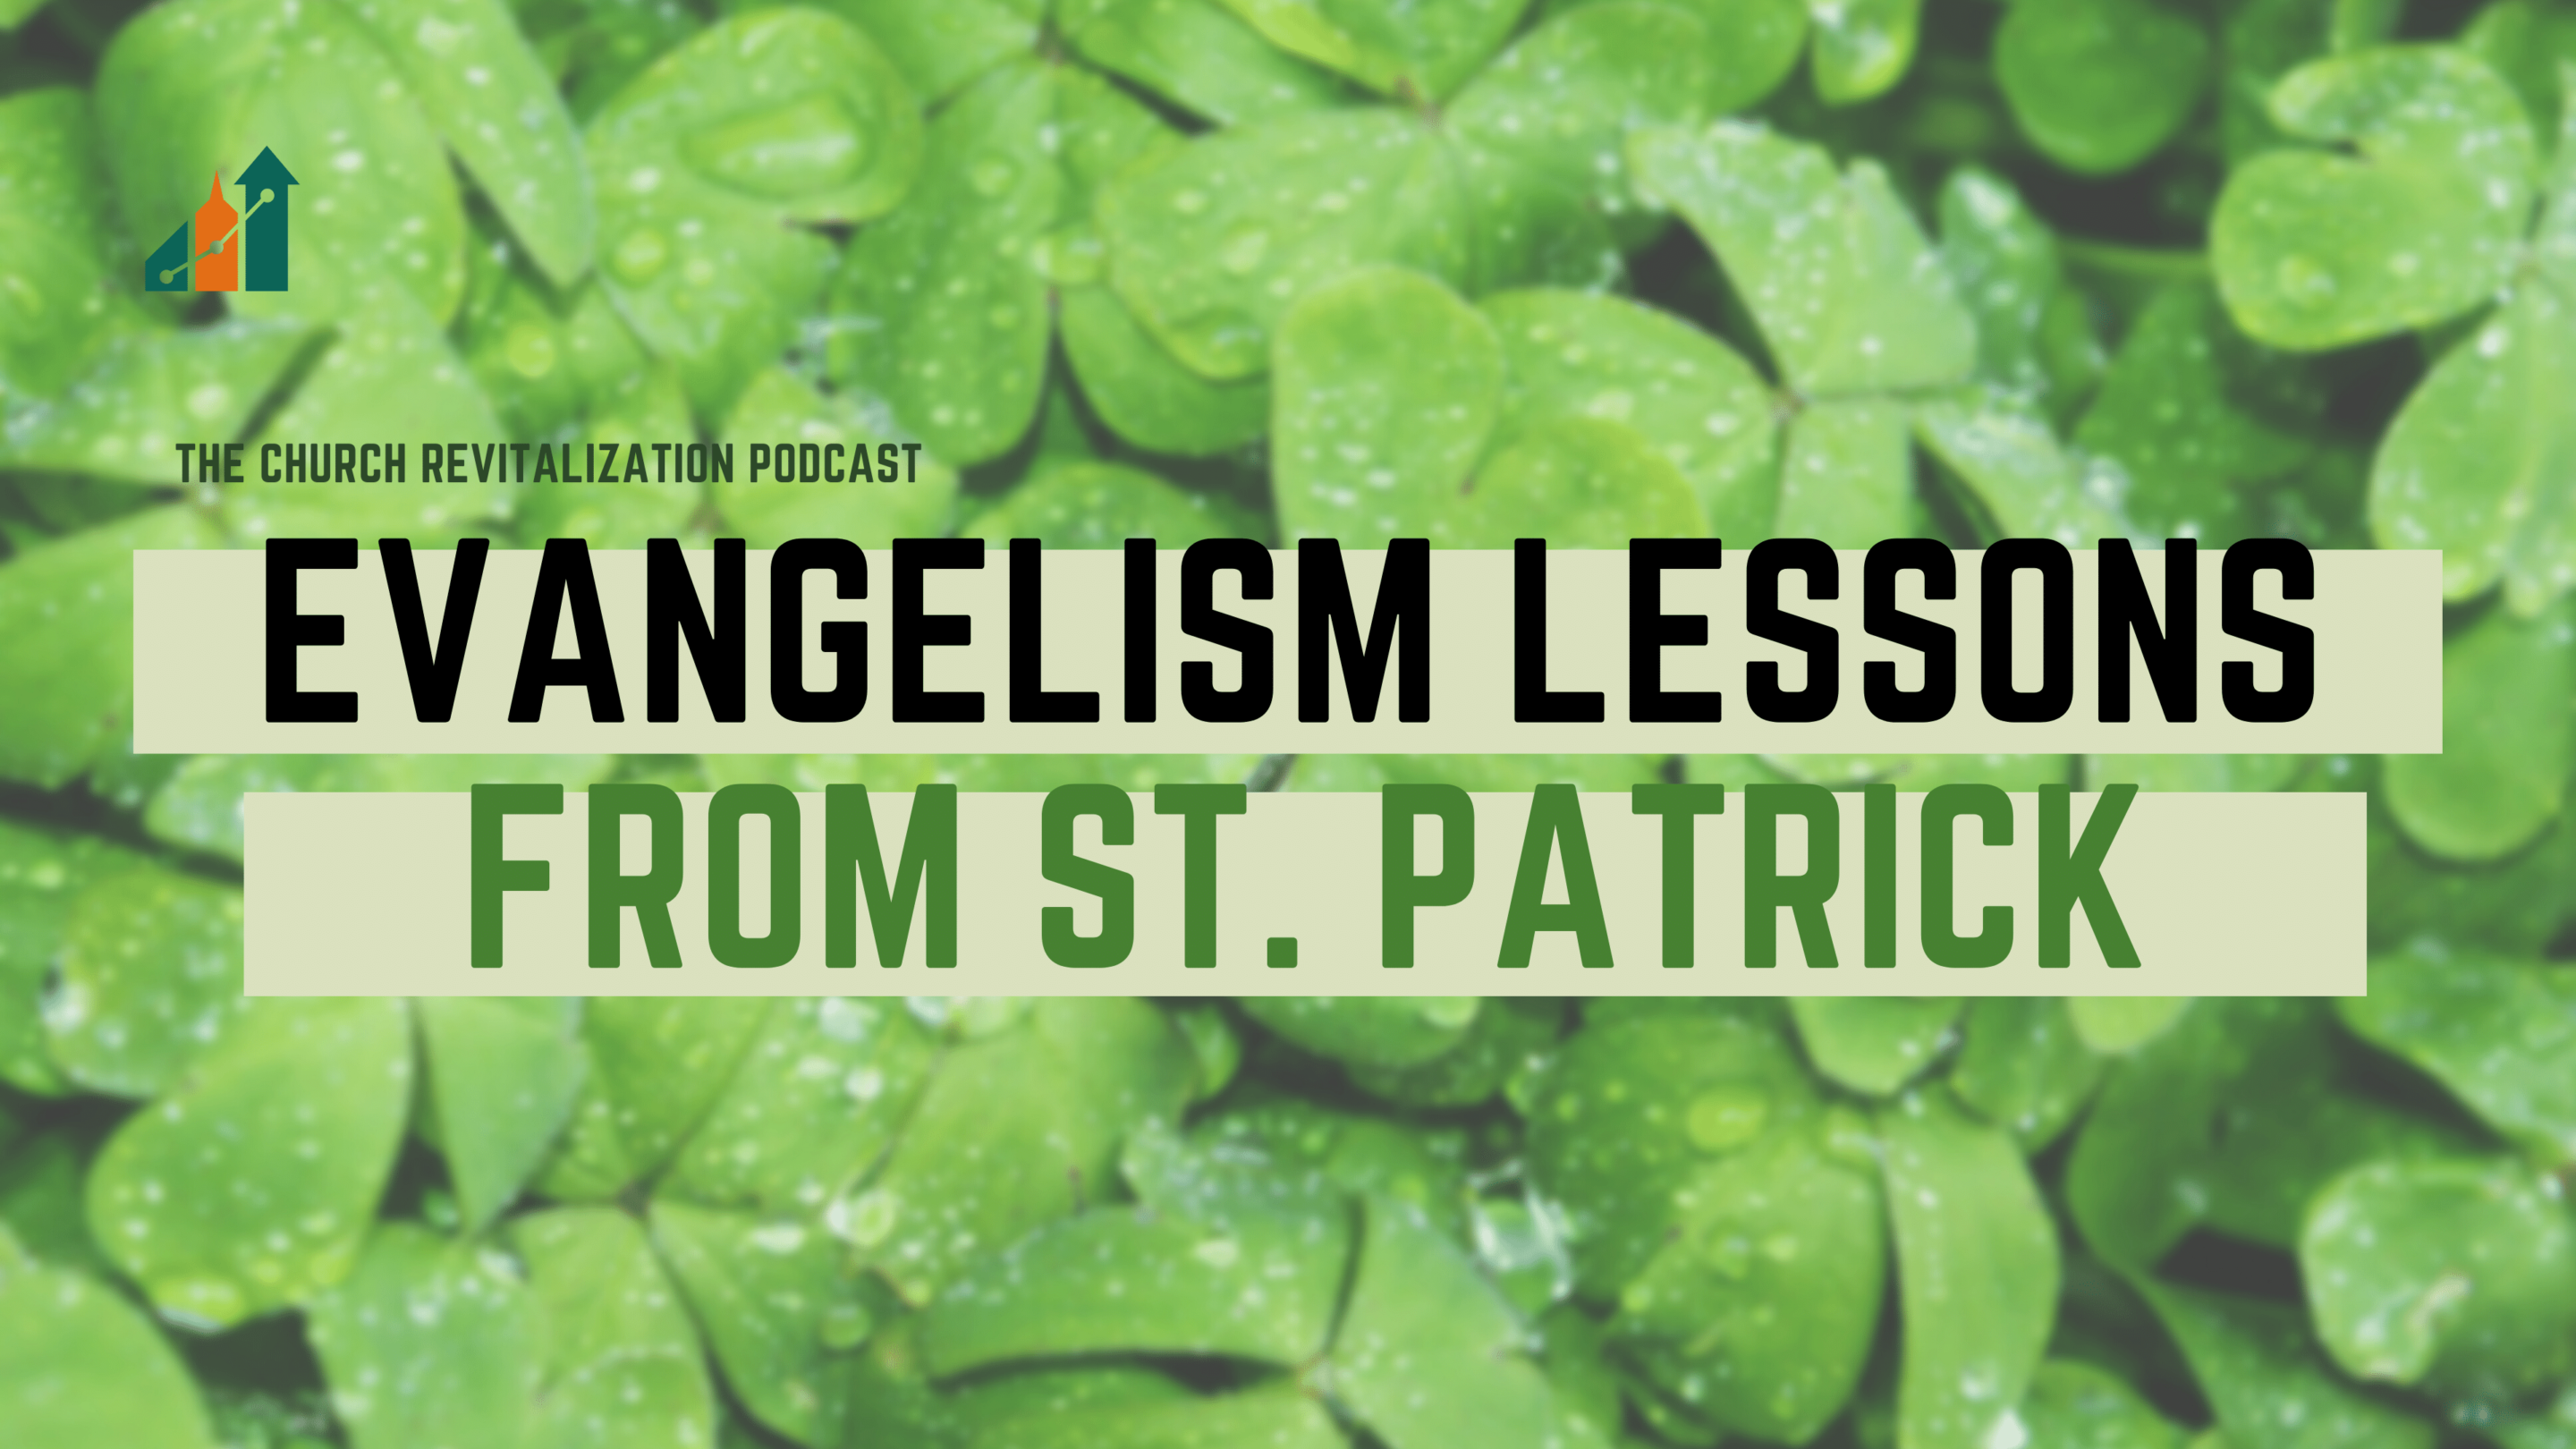 evangelism-lessons-from-st-patrick_the-malphurs-group_the-church-revitalization-podcast